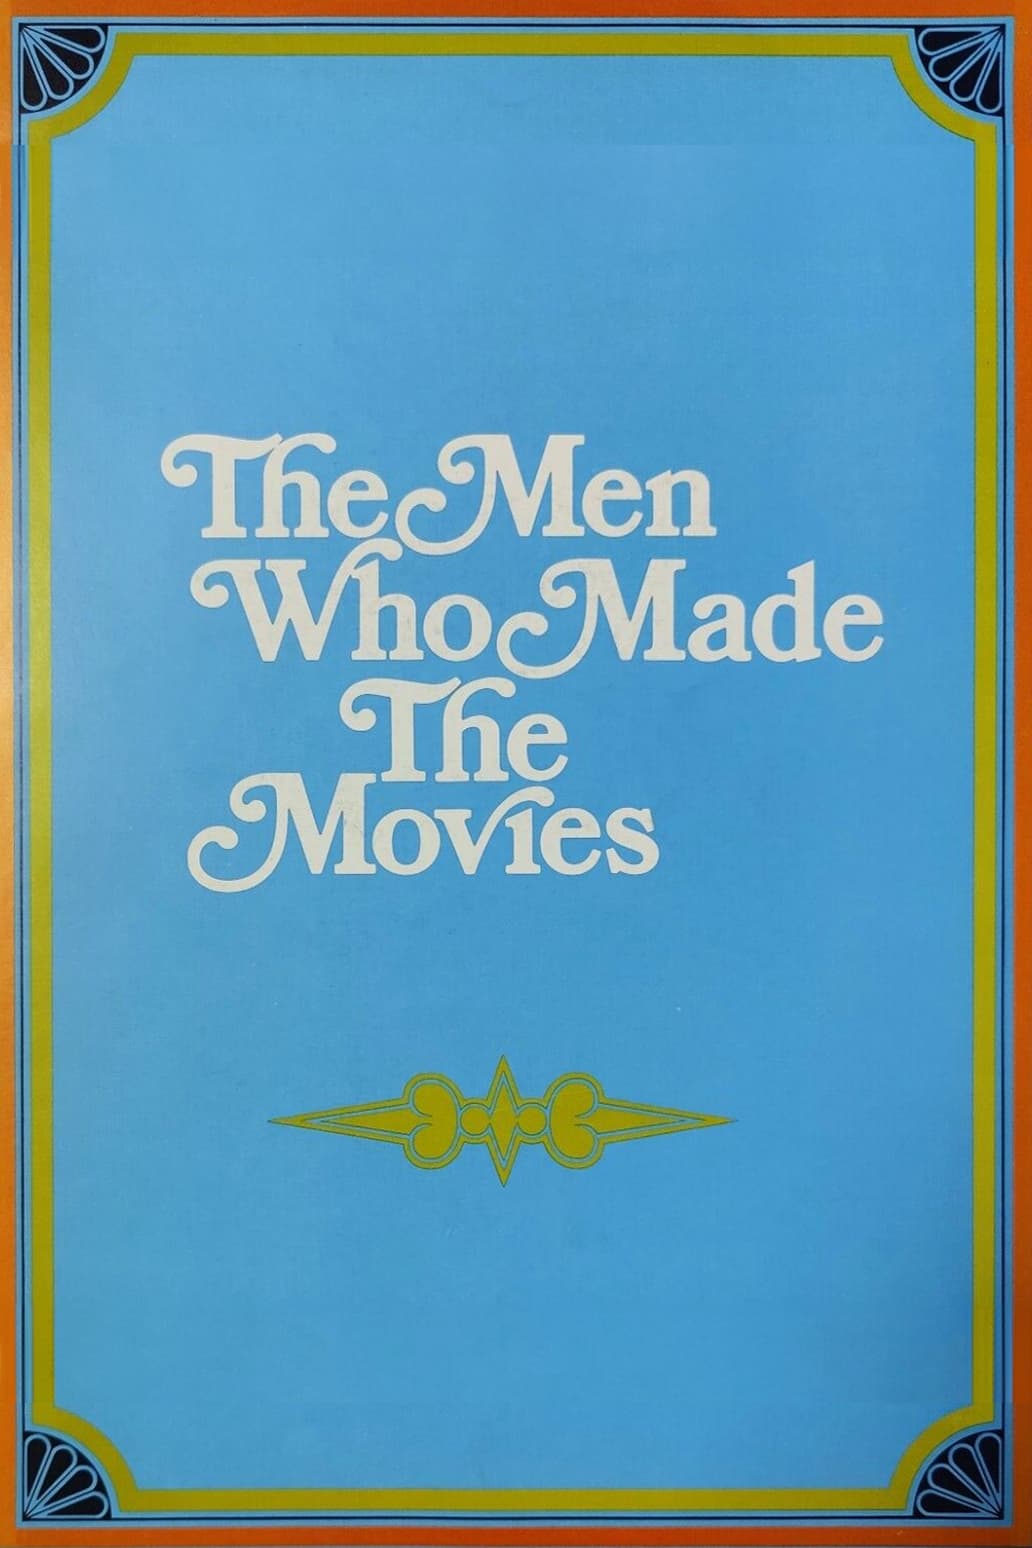 The Men Who Made the Movies